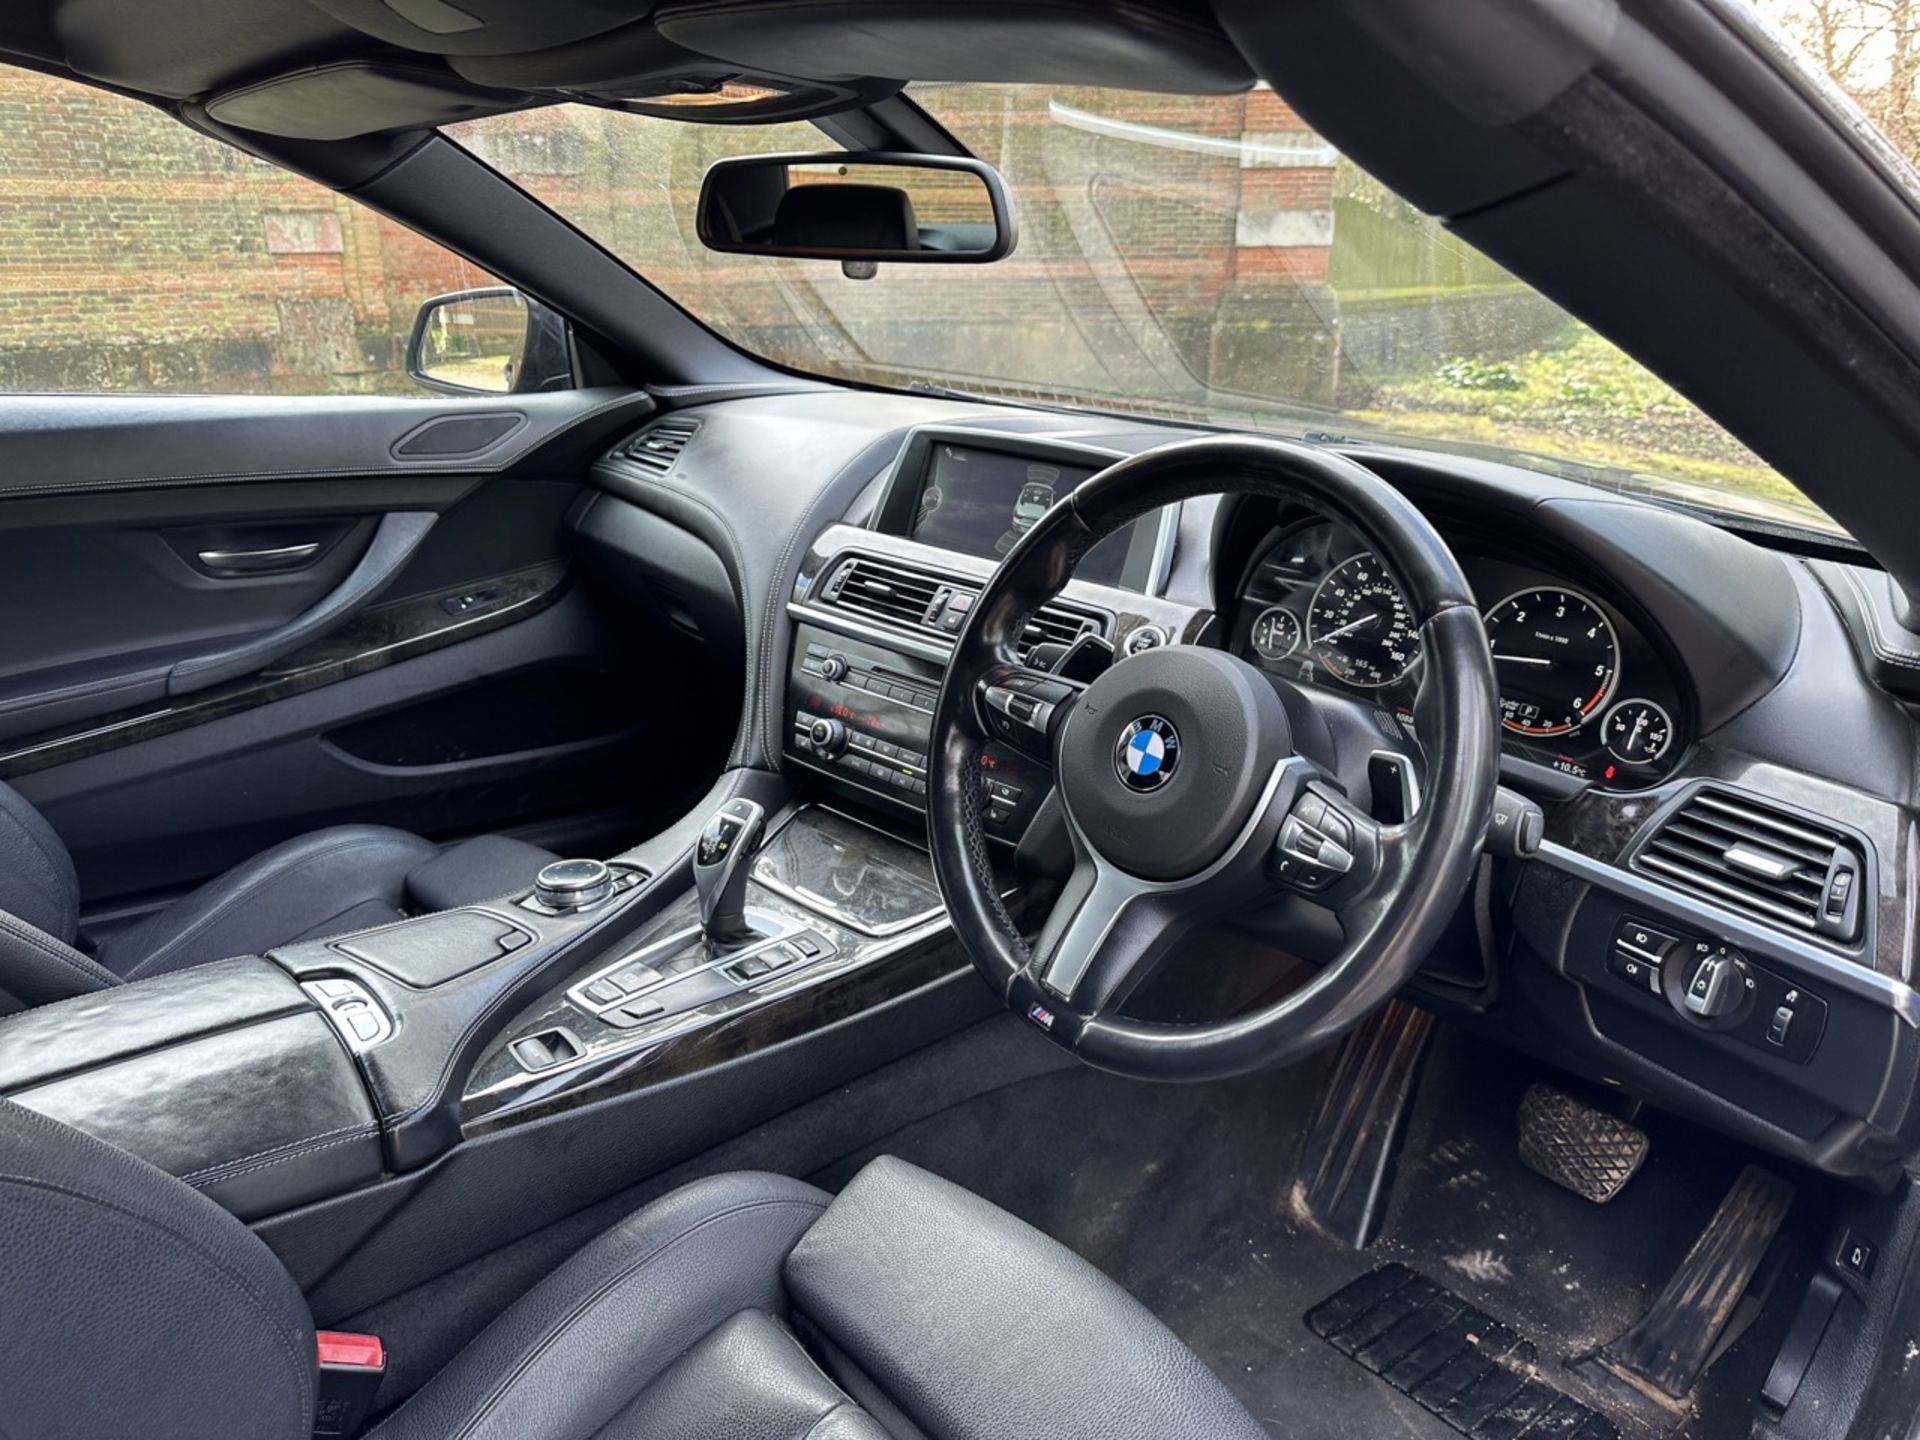 BMW 6 SERIES 640d (M SPORT) Ultimate Summer Car - AUTOMATIC - Convertible - 2014 - 3L Diesel - Image 16 of 18